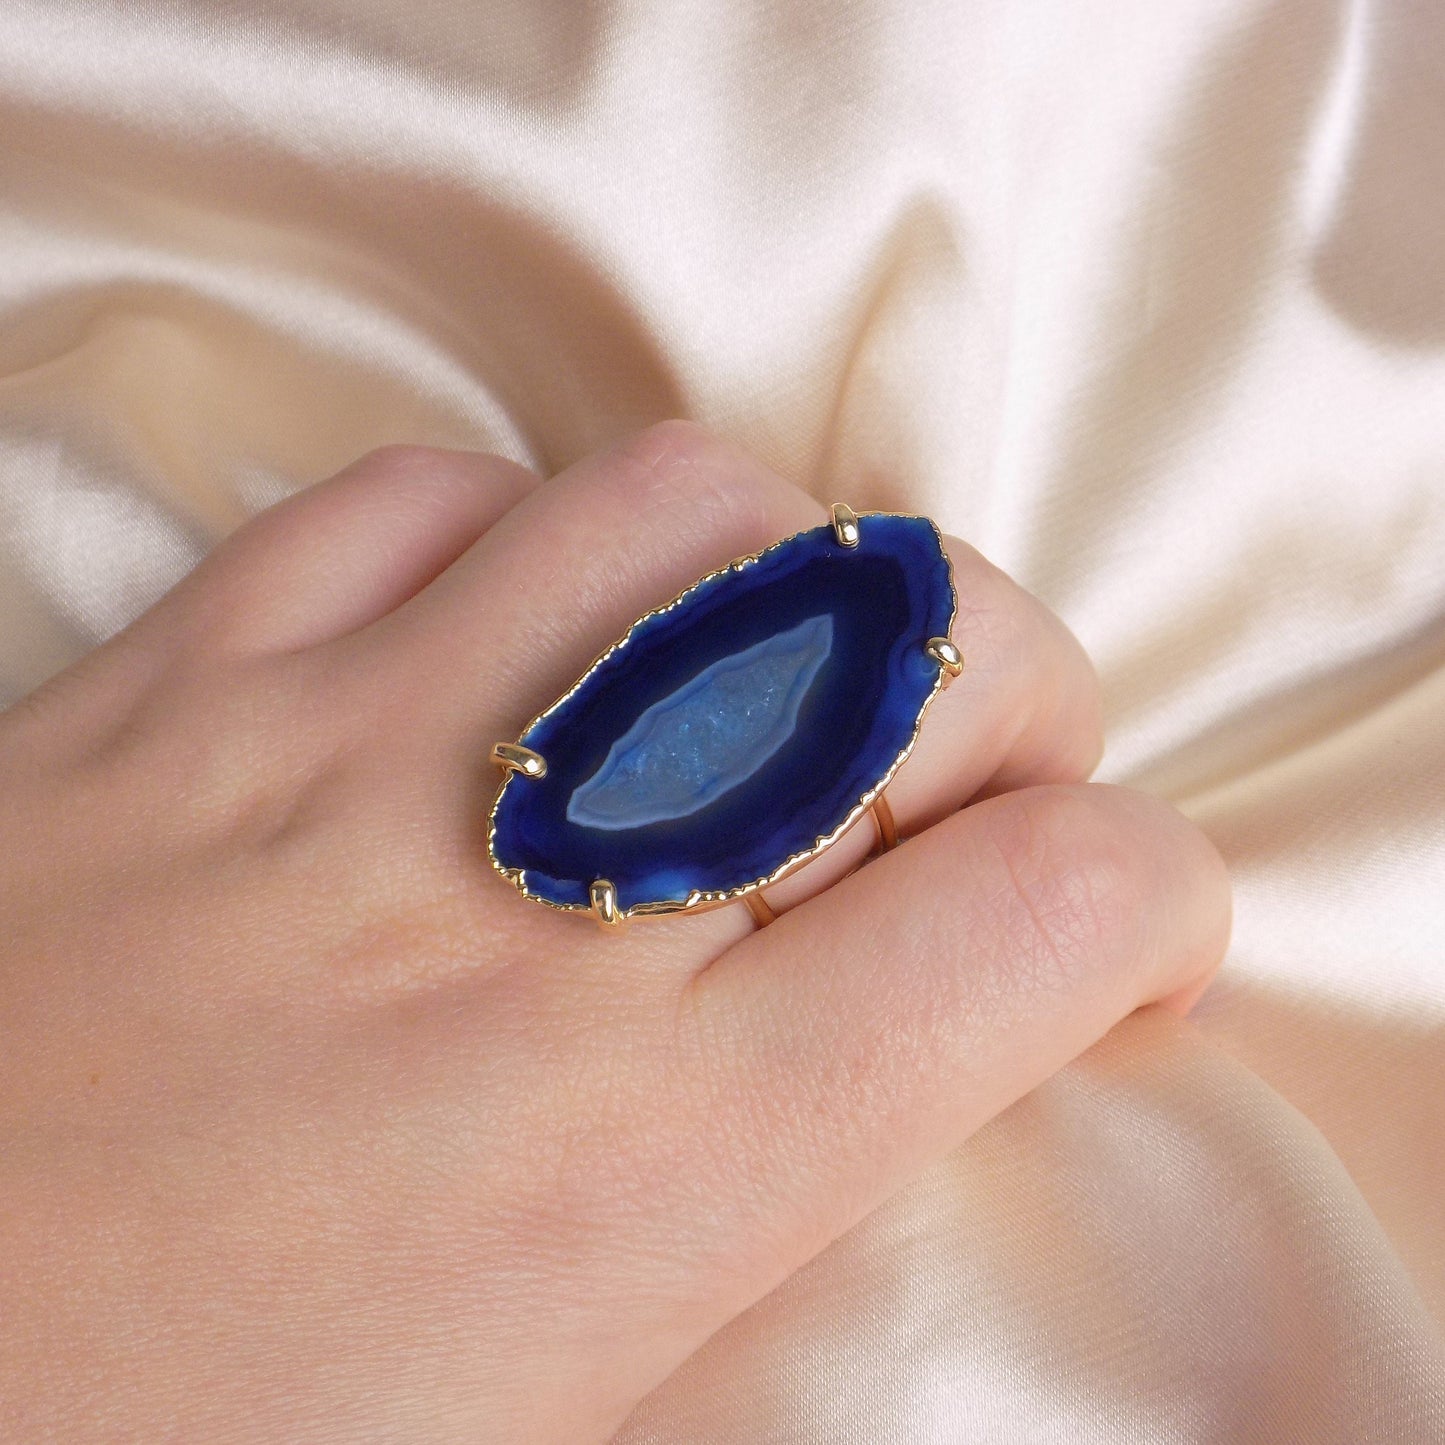 Gifts For Her, Large Blue Agate Slice Natural Gemstone Ring Gold Dipped Adjustable, G15-189